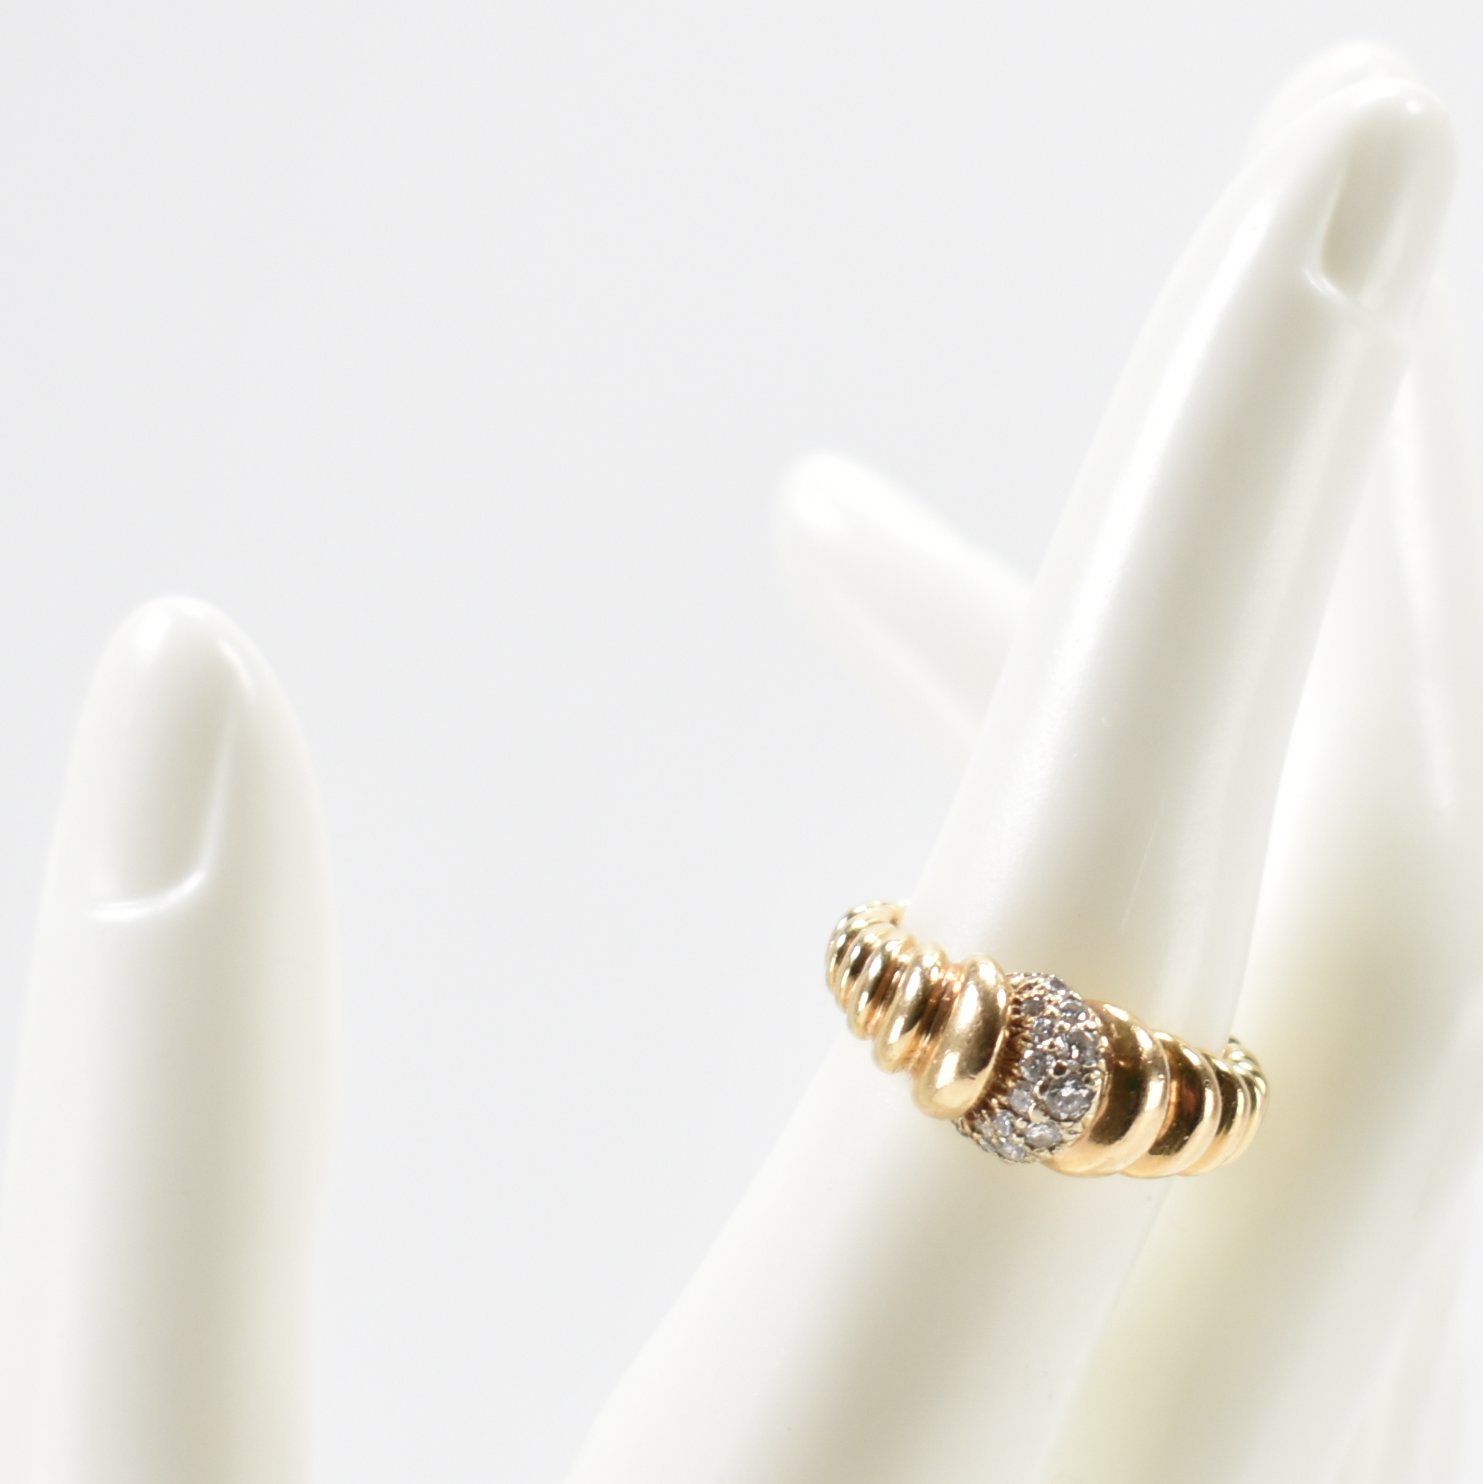 VINTAGE GOLD & DIAMOND REEDED BAND RING - Image 7 of 7